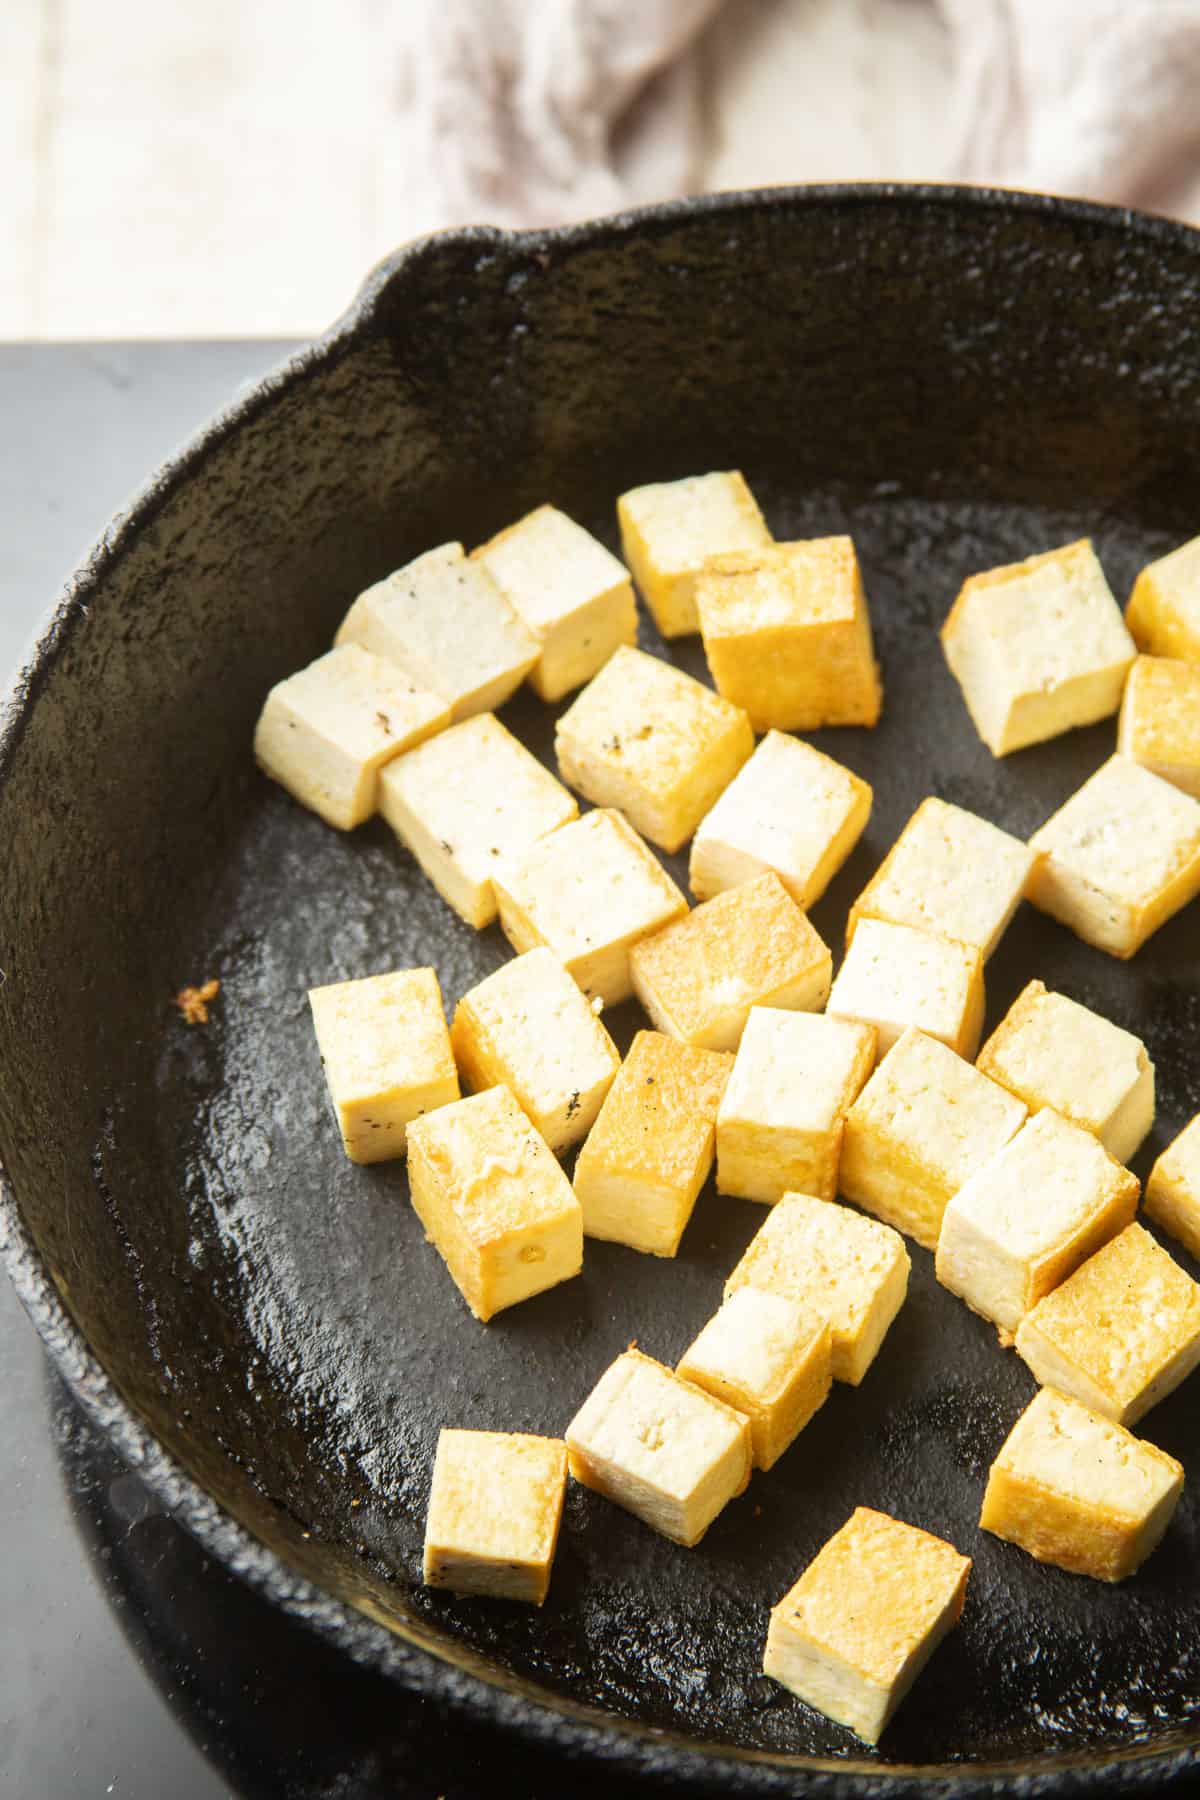 Tofu cubes cooking in a skillet.